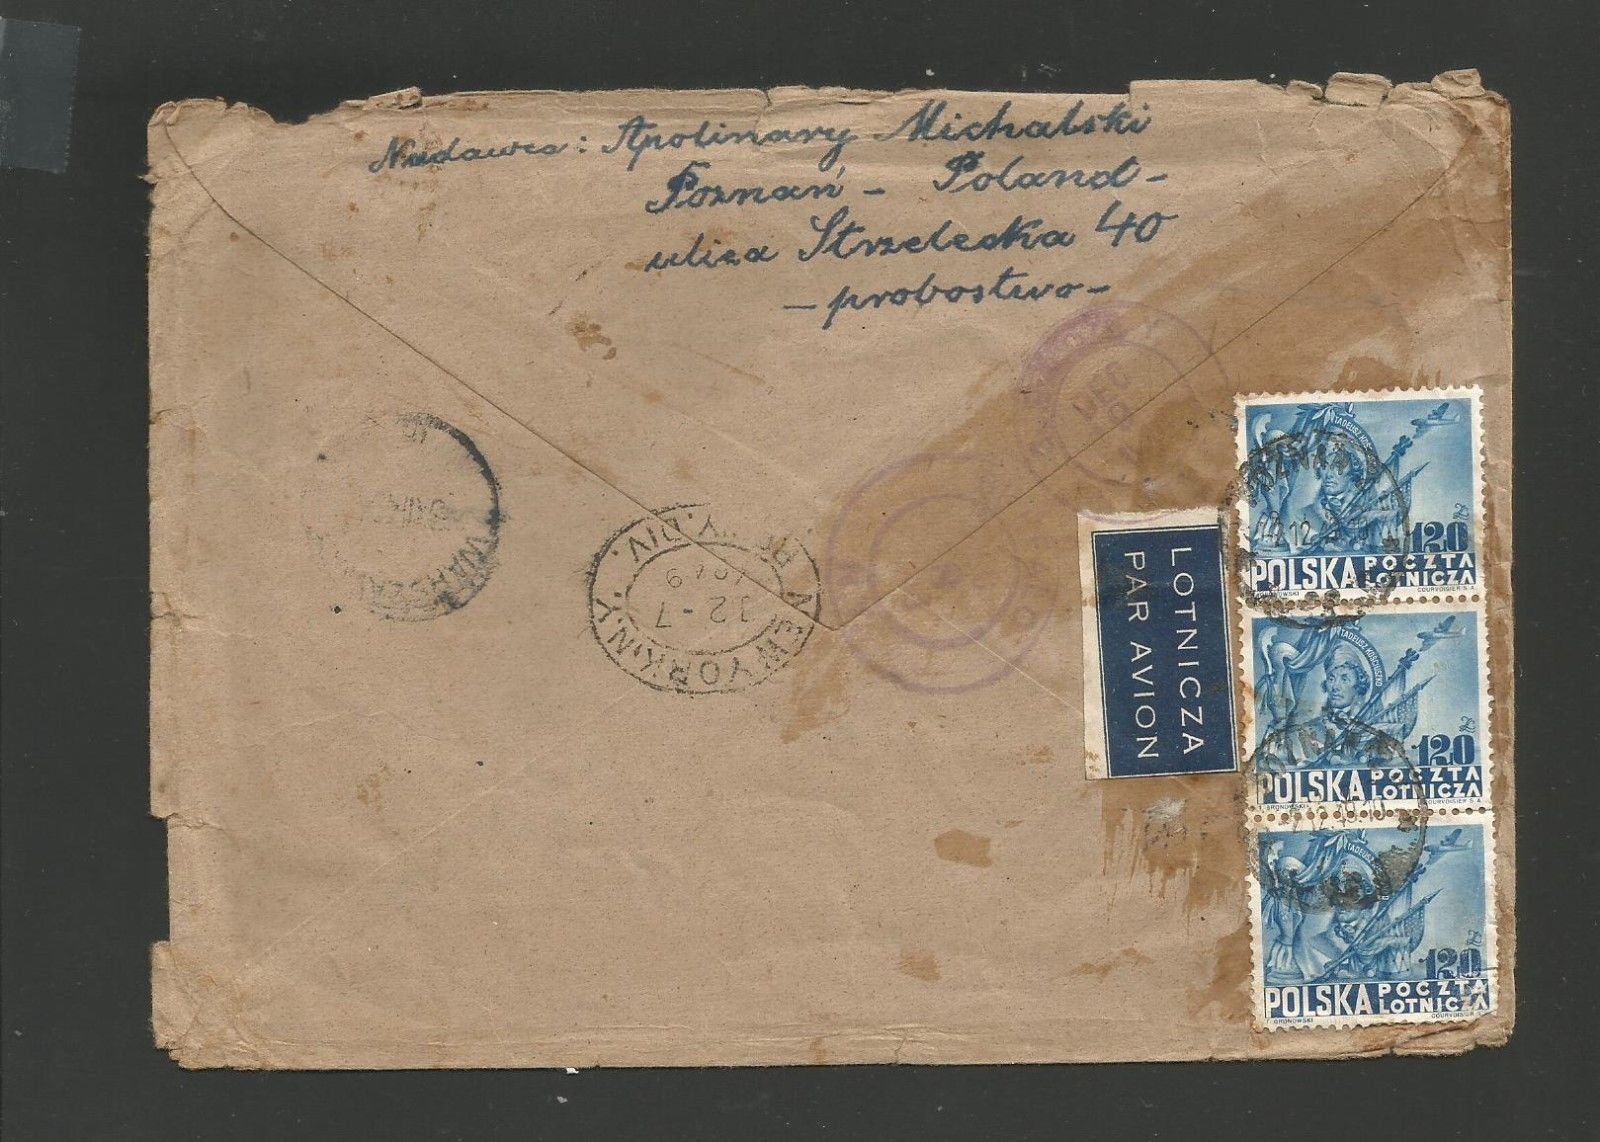 1948 POLAND REGISTERED  AIR COVER TO US - VALUABLE AIRMAIL STRIP OF 3 STAMPS